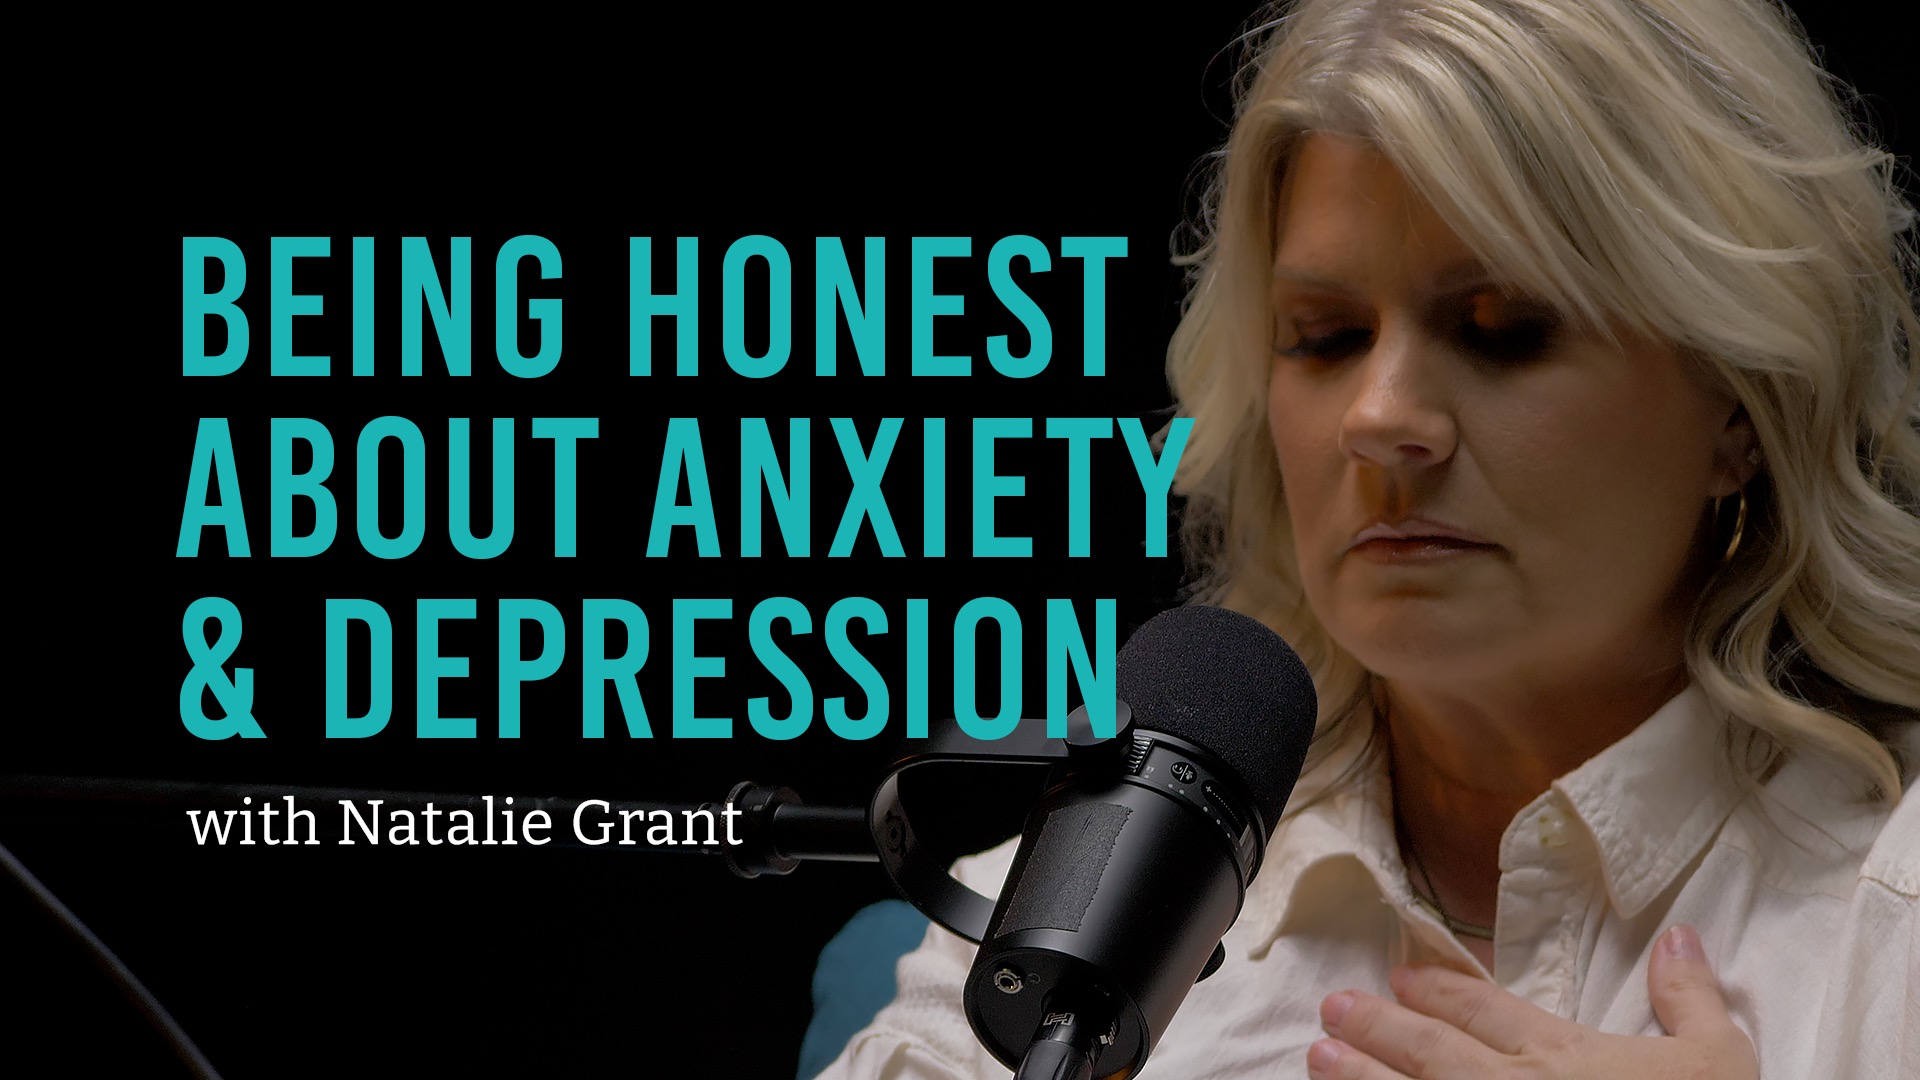 Natalie Grant opening up about crippling anxiety and depression